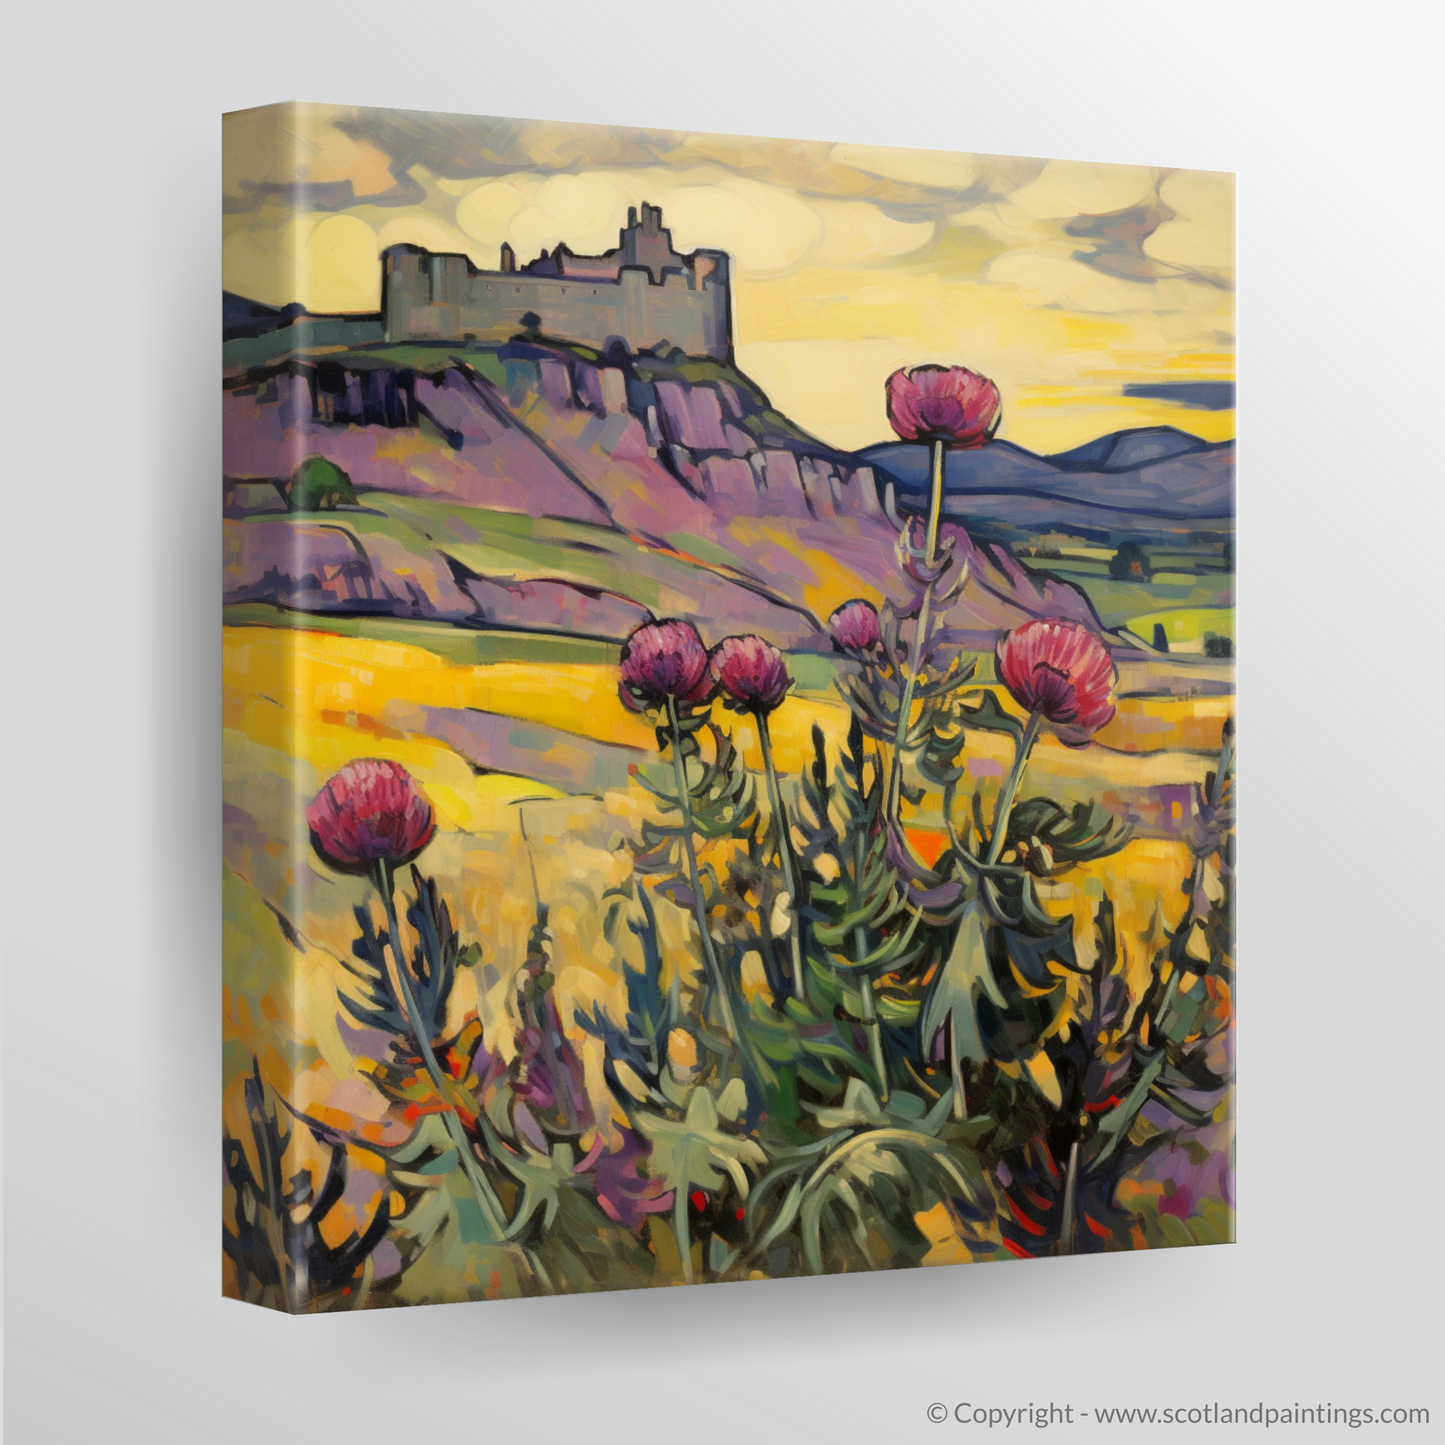 Thistle in the Highlands: A Fauvist Ode to Scottish Resilience